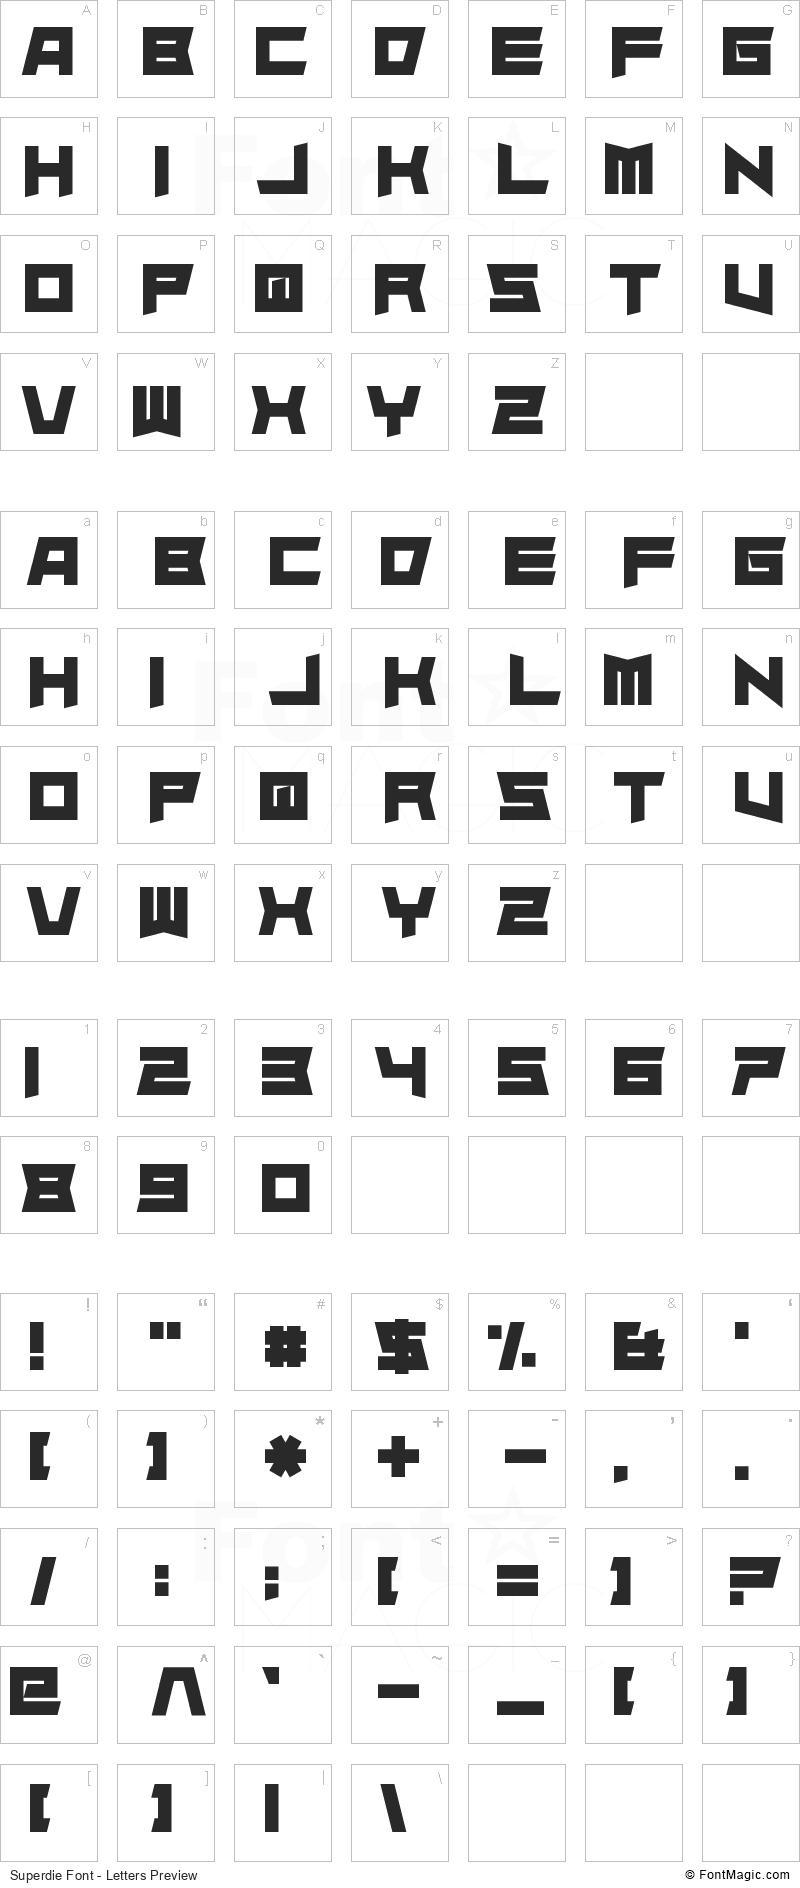 Superdie Font - All Latters Preview Chart